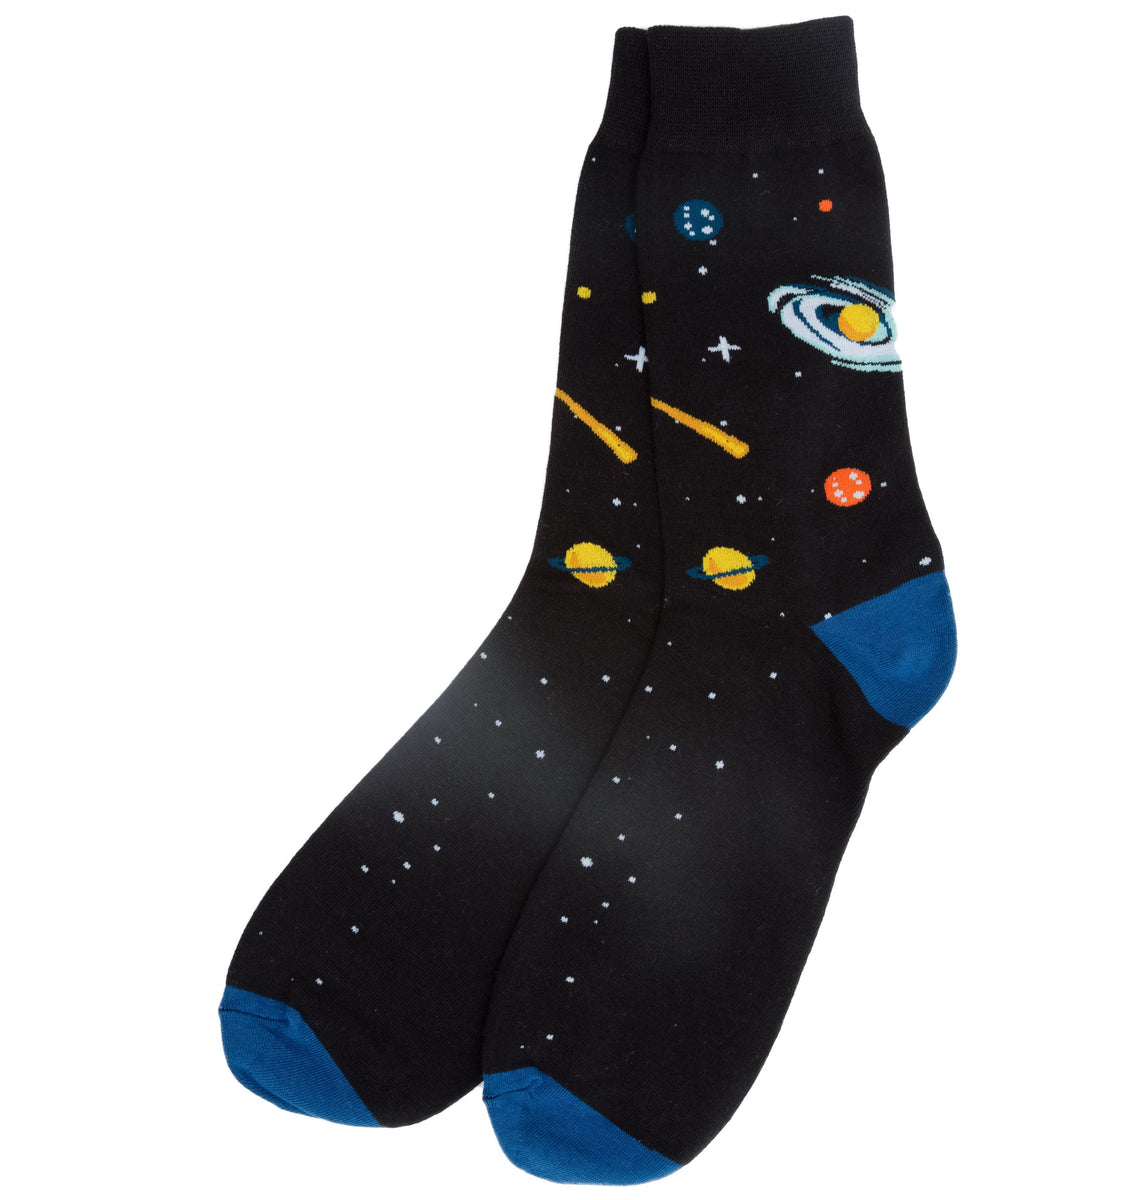 Outer Space - Simply Funky Socks | The Ascot Sock Company